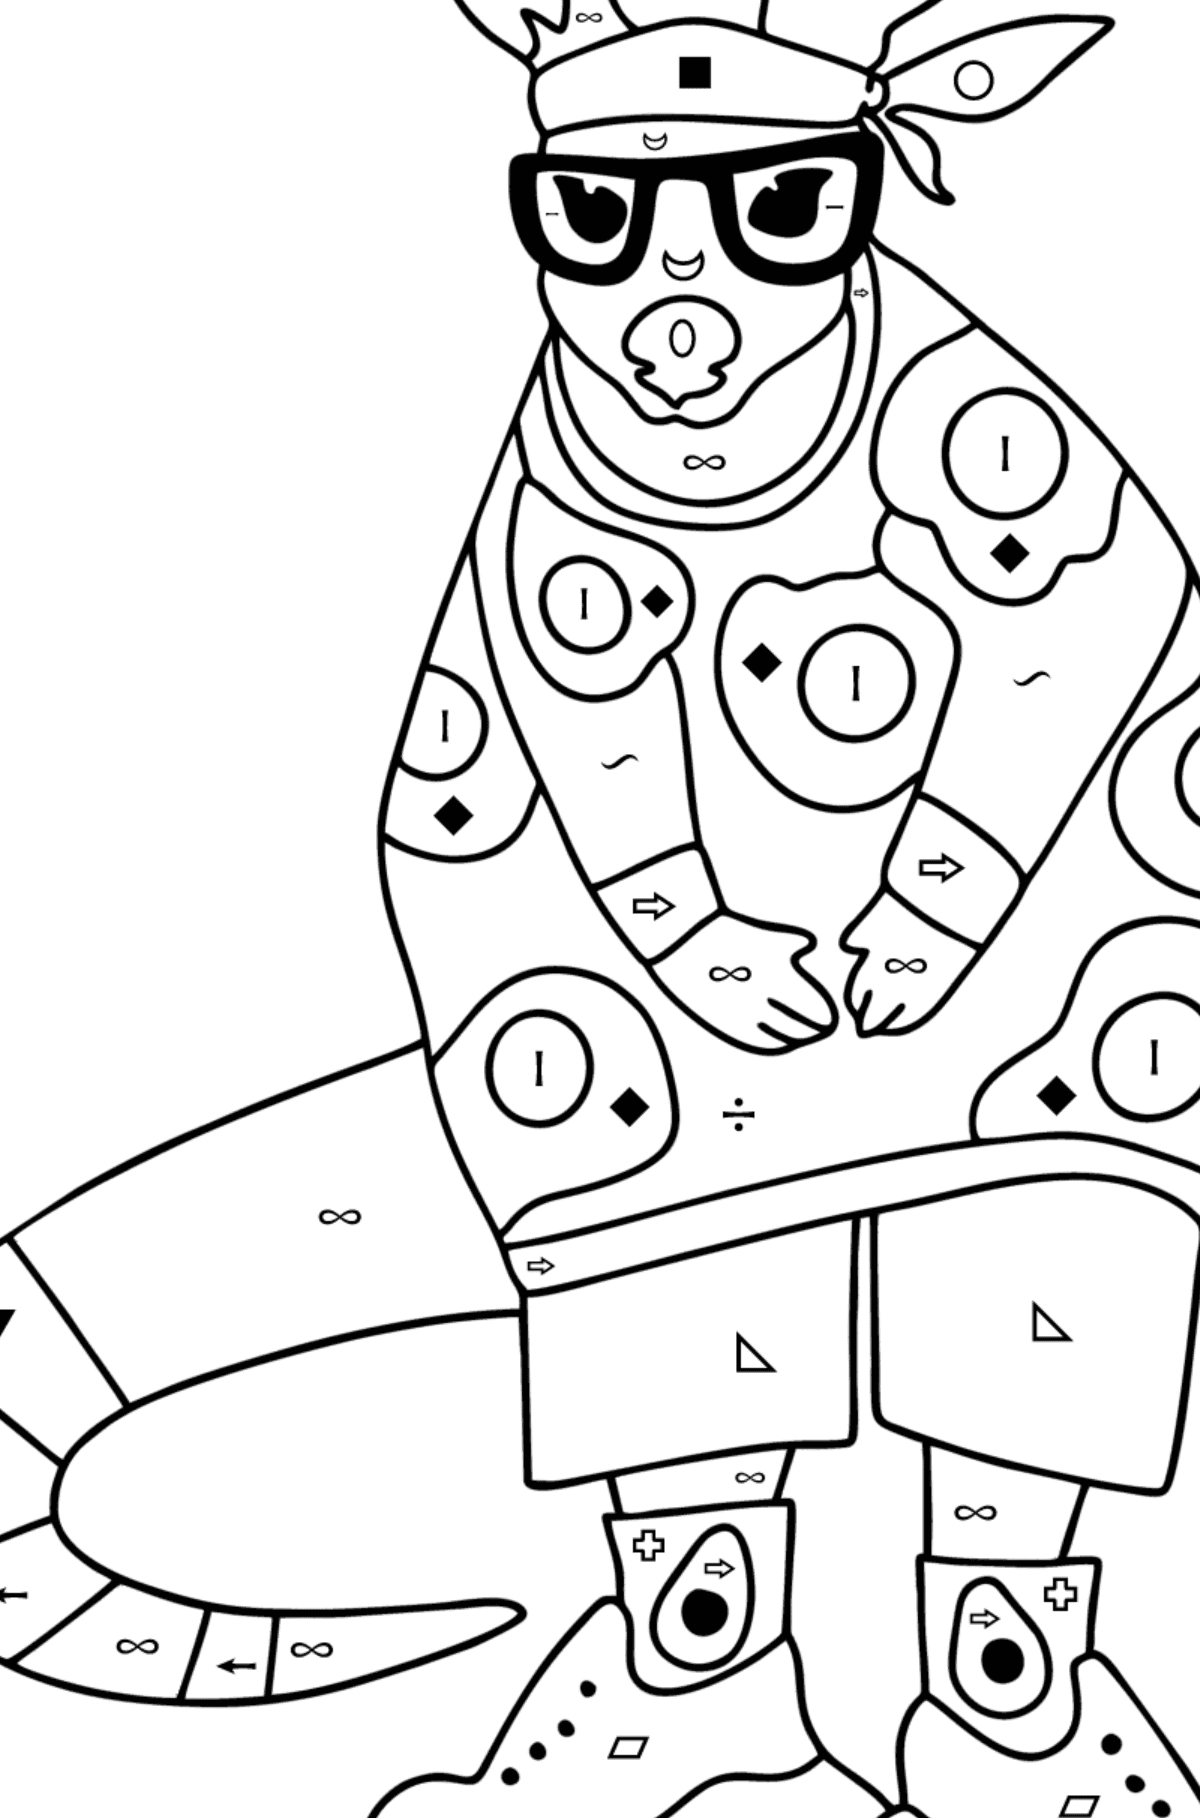 Cartoon Kangaroo coloring page - Coloring by Symbols and Geometric Shapes for Kids